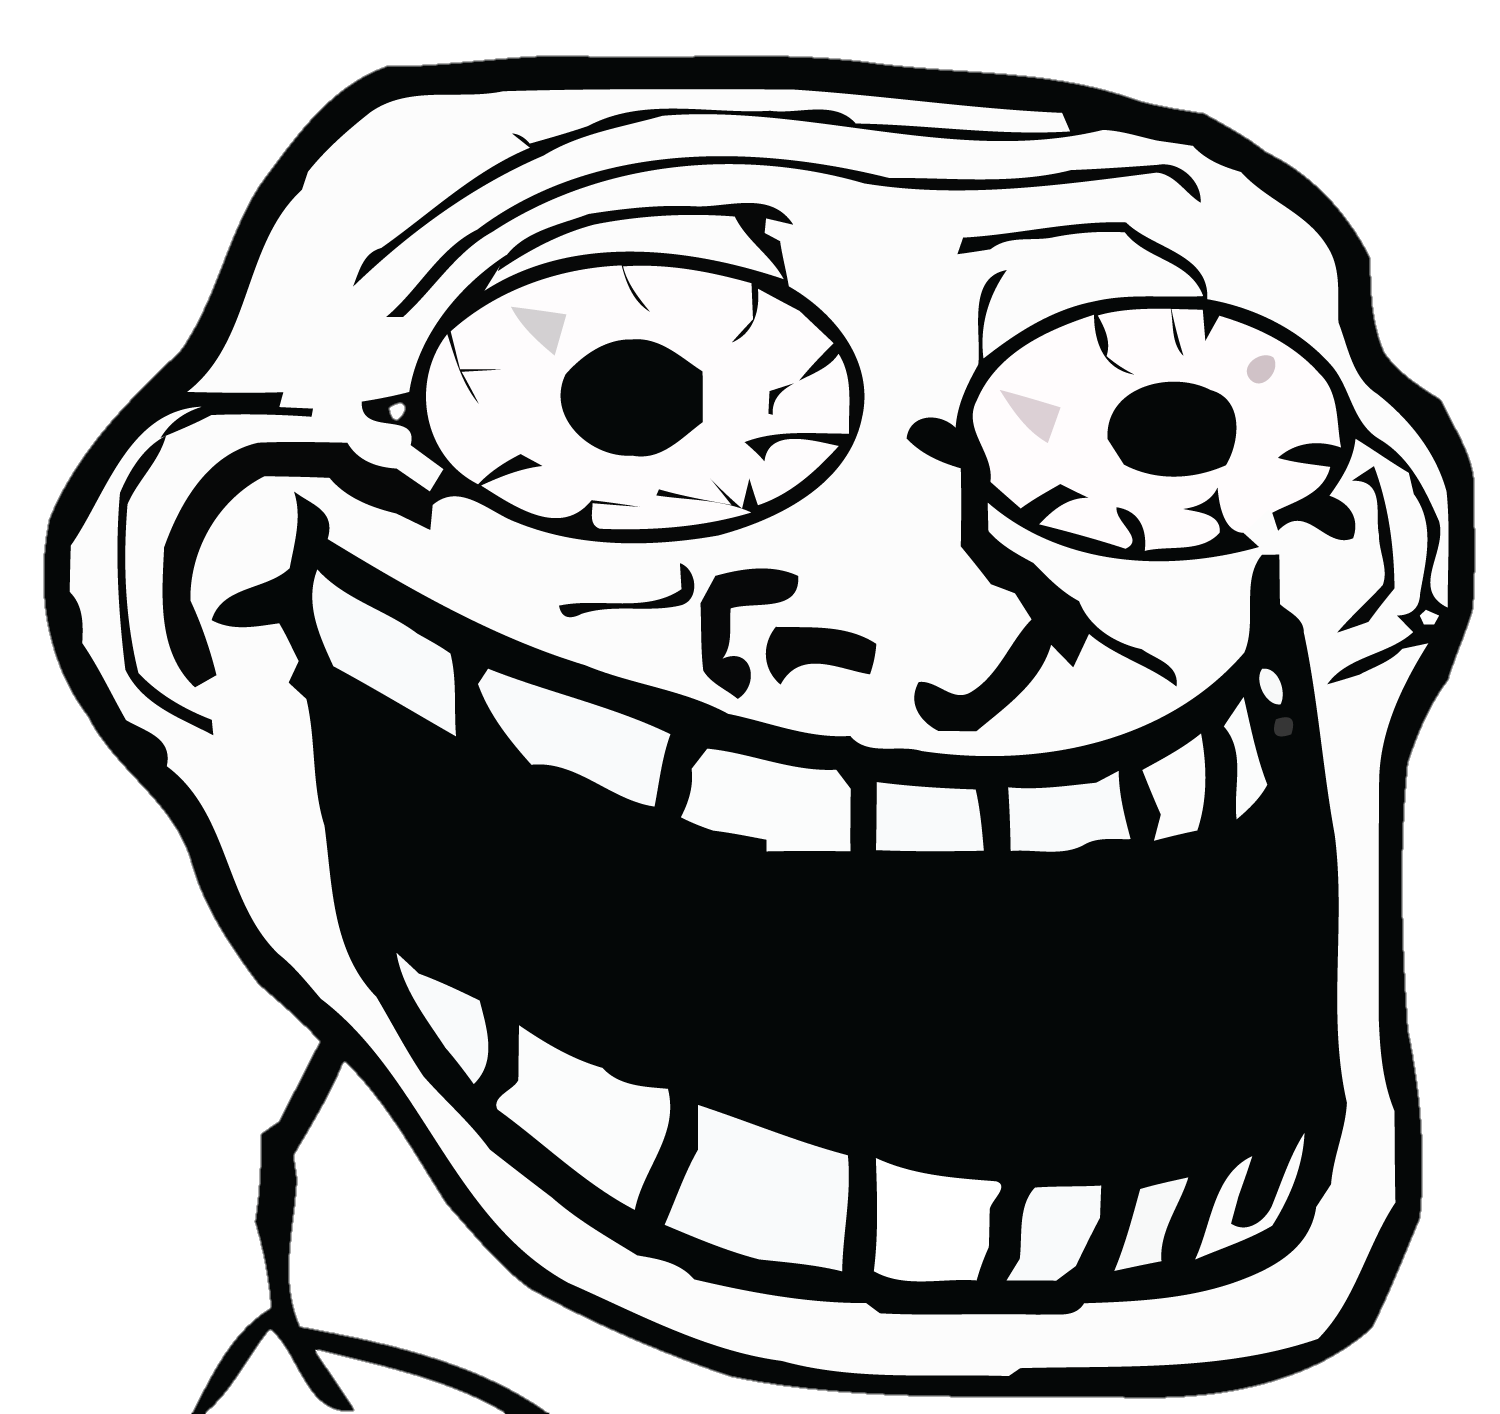 trollface-png-from-pngfre-22